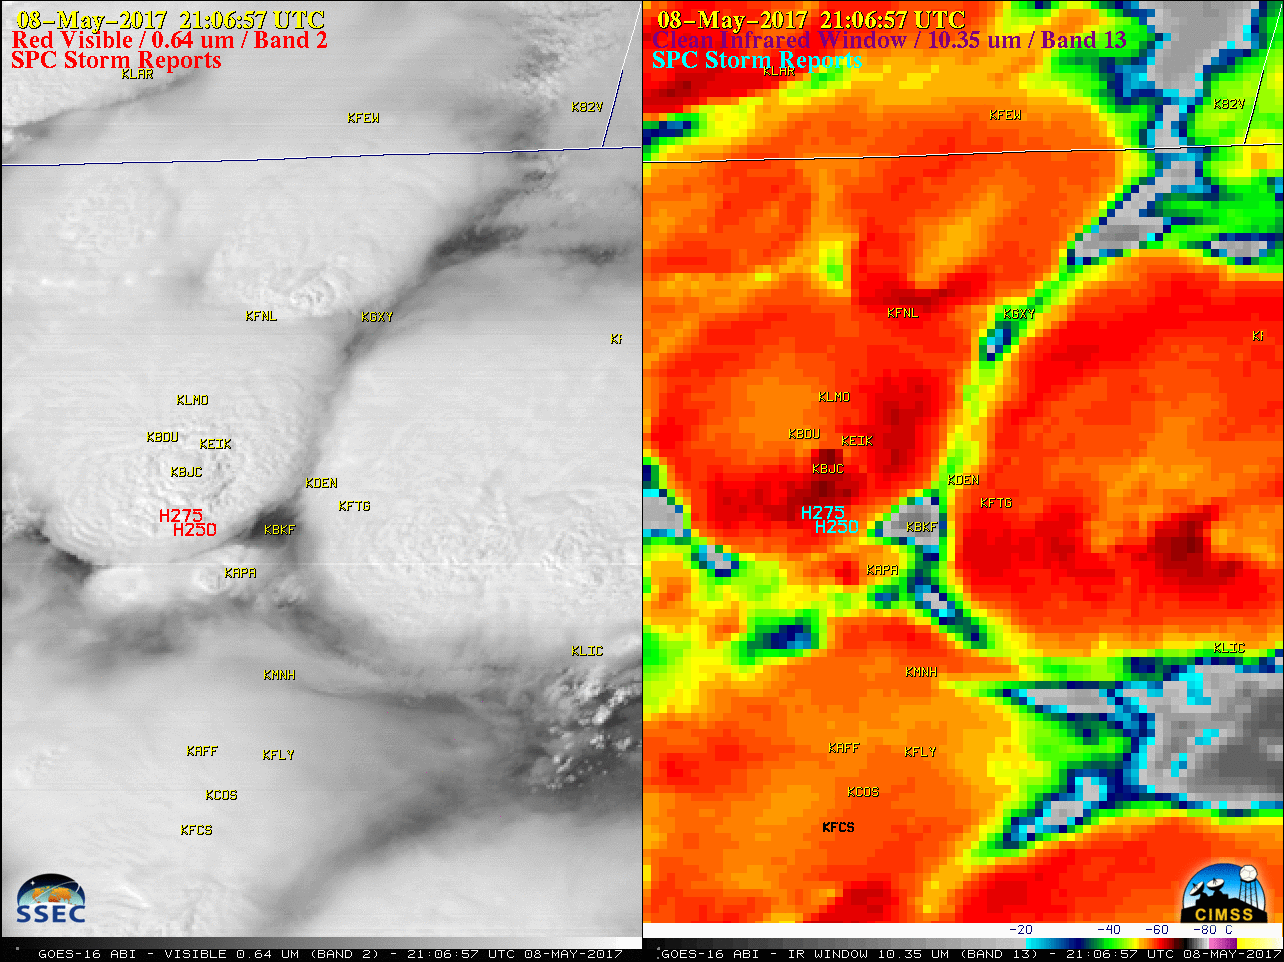 GOES-16 Visible (0.64 µm, left) and Infrared Window (10.4 µm, right) images, with surface station identifiers in yellow and SPC reports of hail size in cyan [click to play MP4 animation]